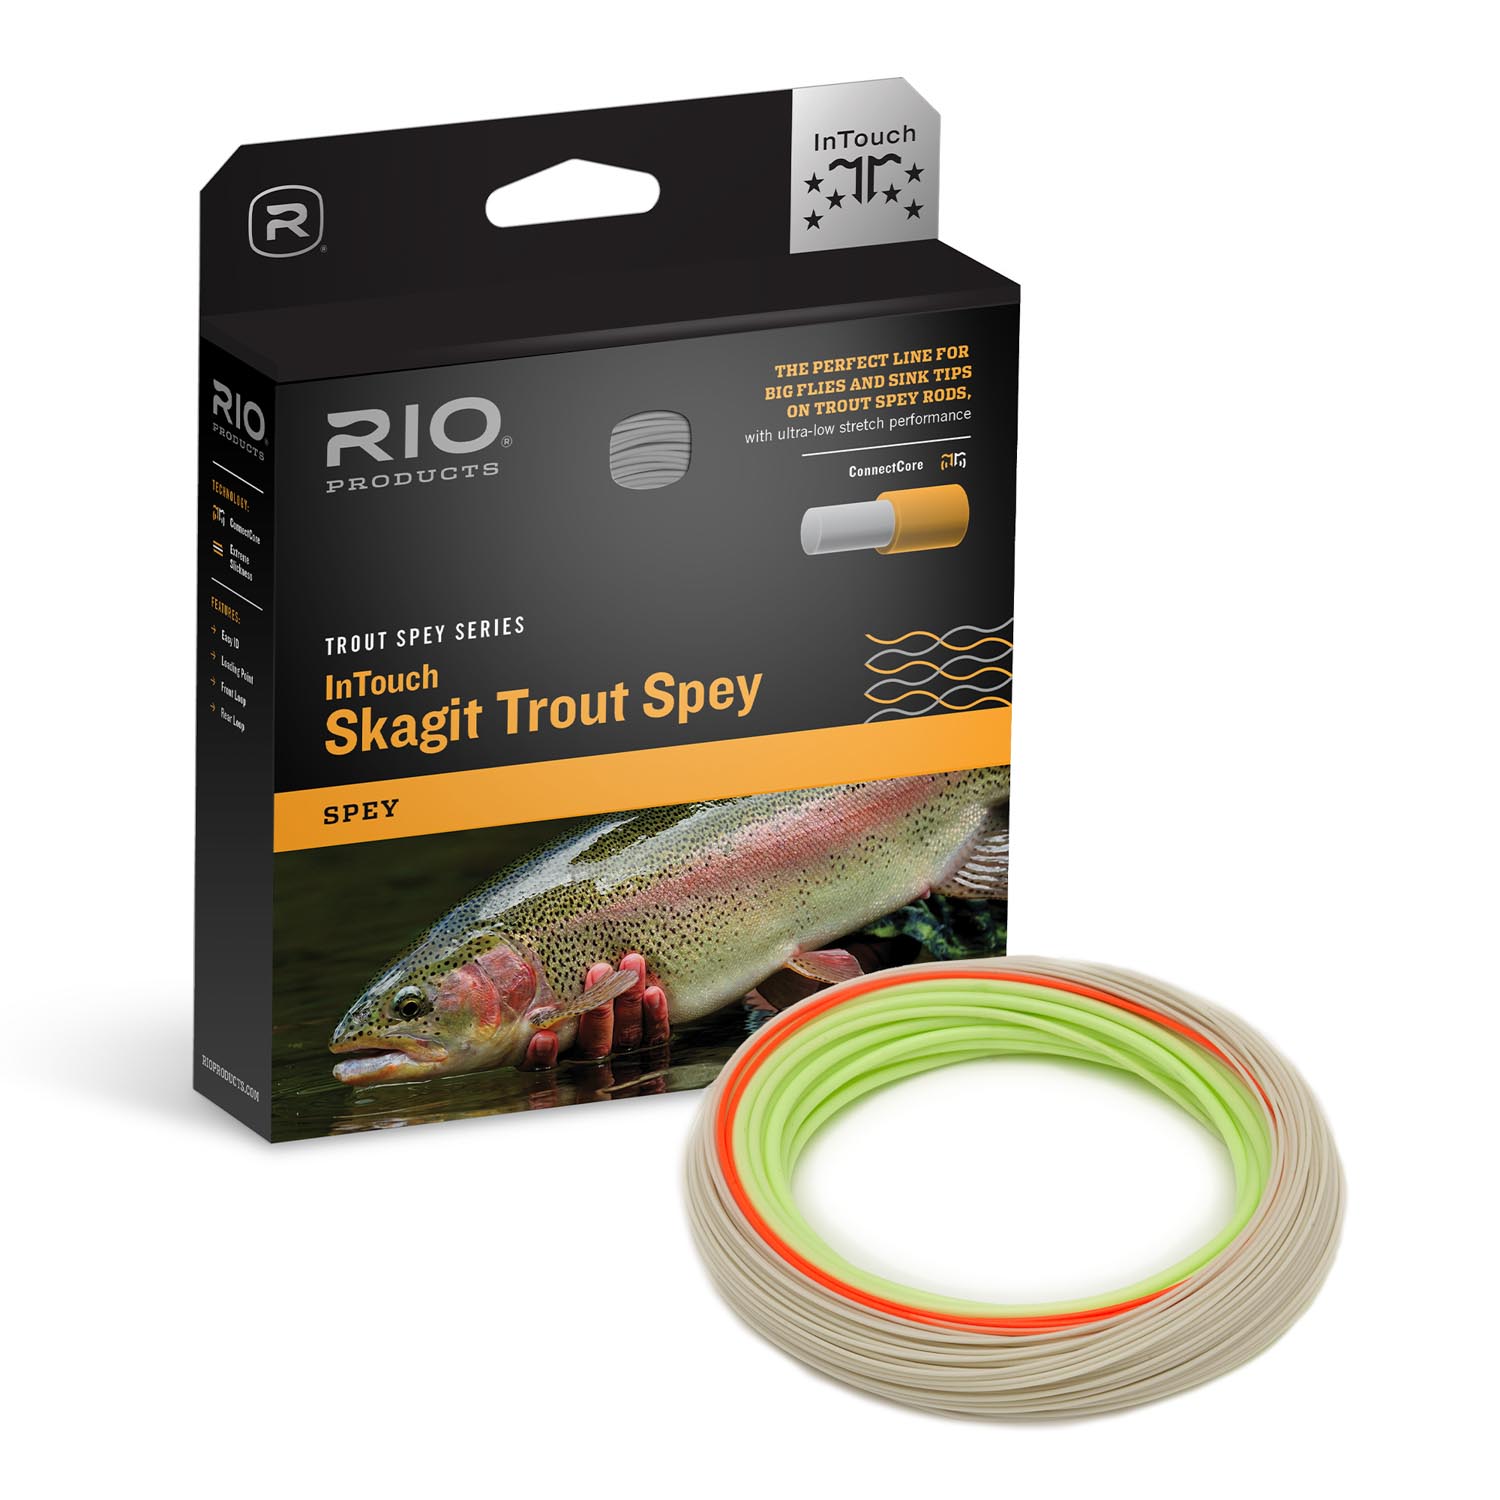 InTouch Skagit Trout Spey Box + Spool